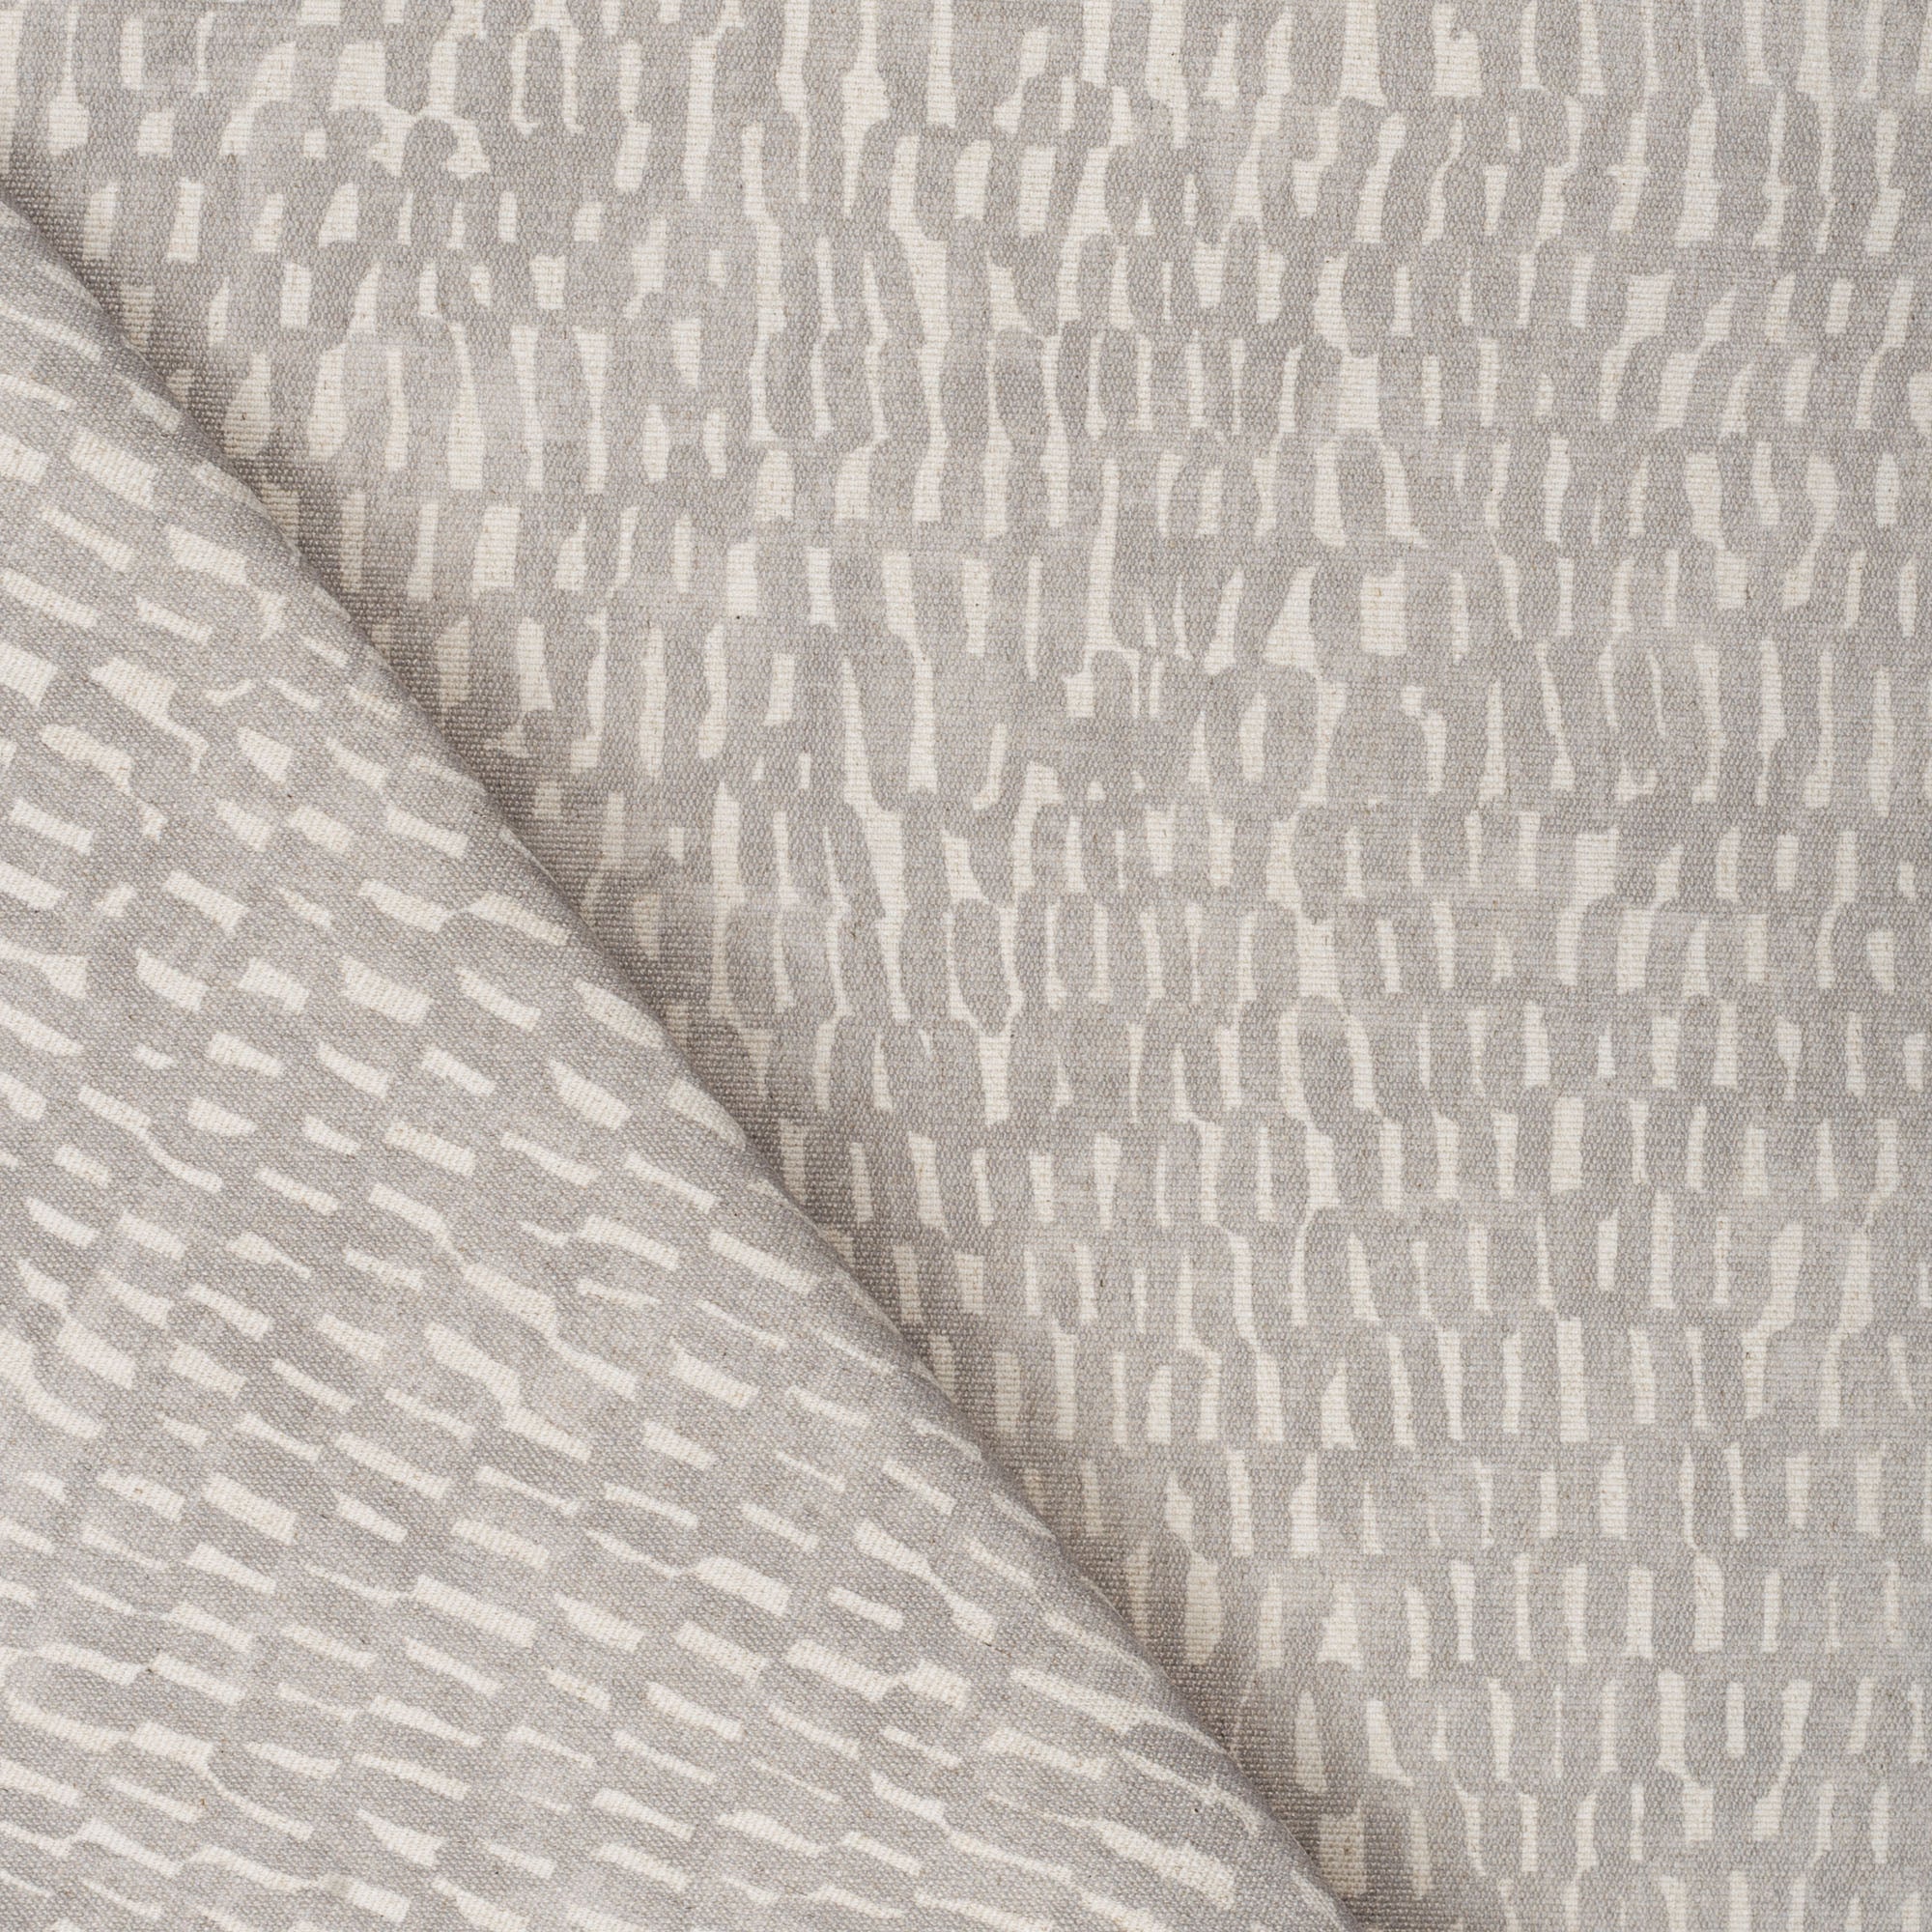 Avareno Silver, a light gray and sandy beige small scale abstract print fabric from Tonic Living 